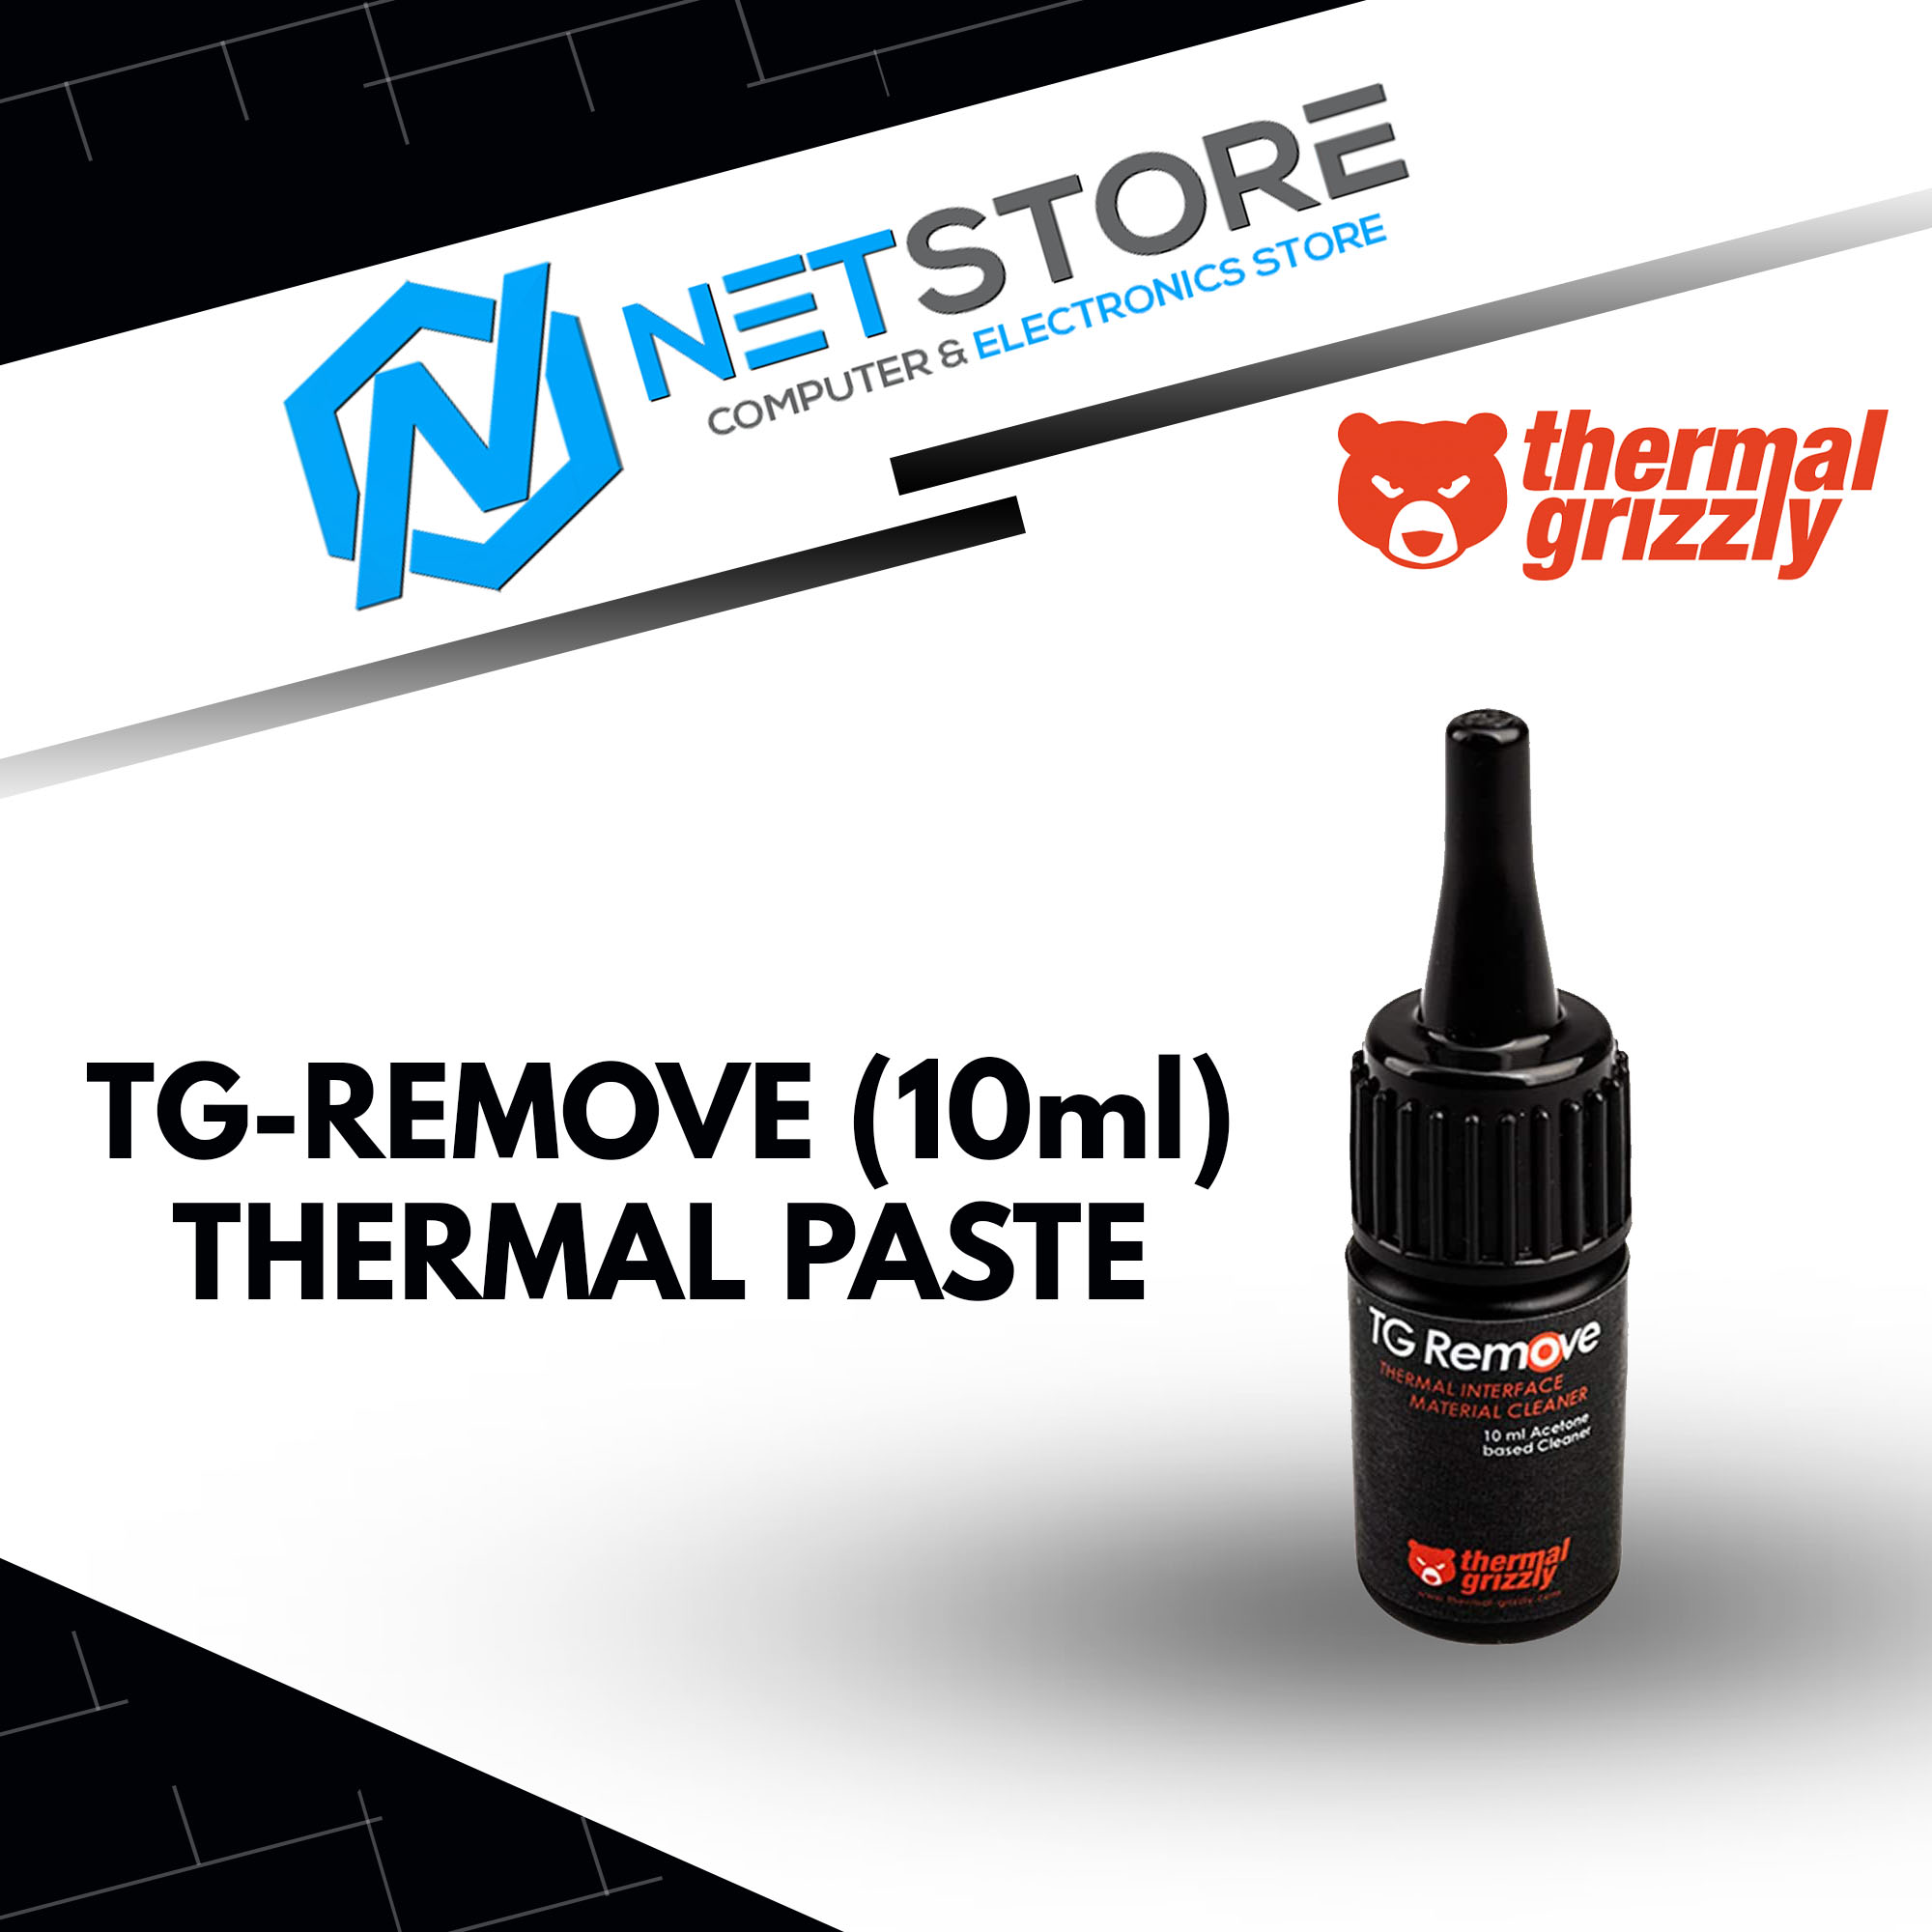 THERMAL GRIZZLY TG-REMOVE (10ml) THERMAL PASTE - TG-AR-100